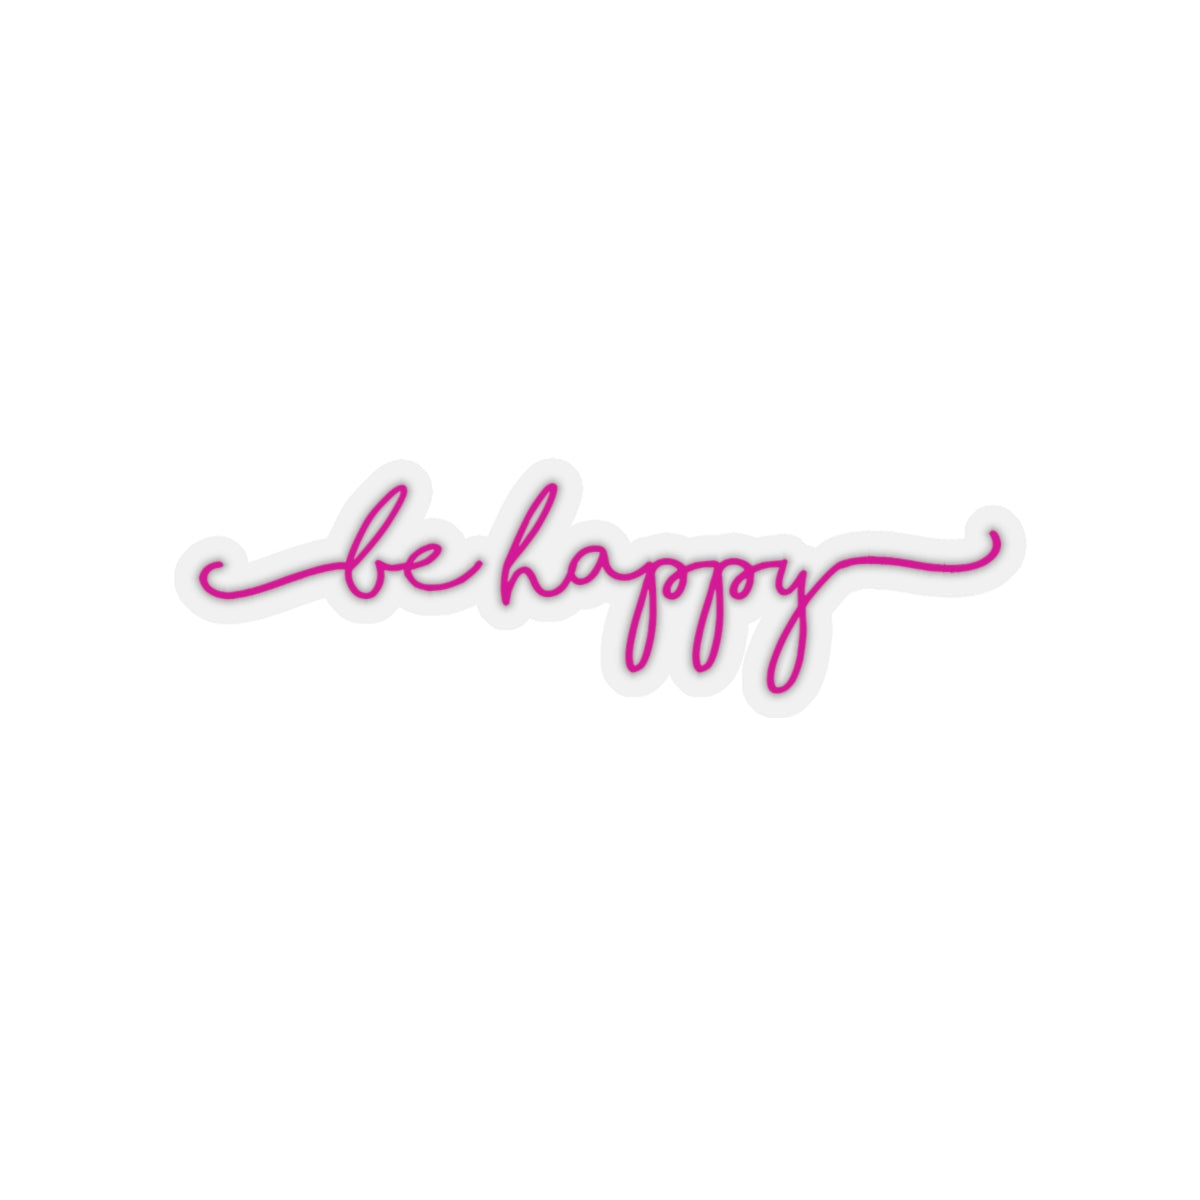 Be Happy Sticker, Inspirational Positive Quote Vsco Laptop Vinyl Cute Waterproof Tumbler Car Bumper Waterbottle Aesthetic Label Wall Decal Starcove Fashion